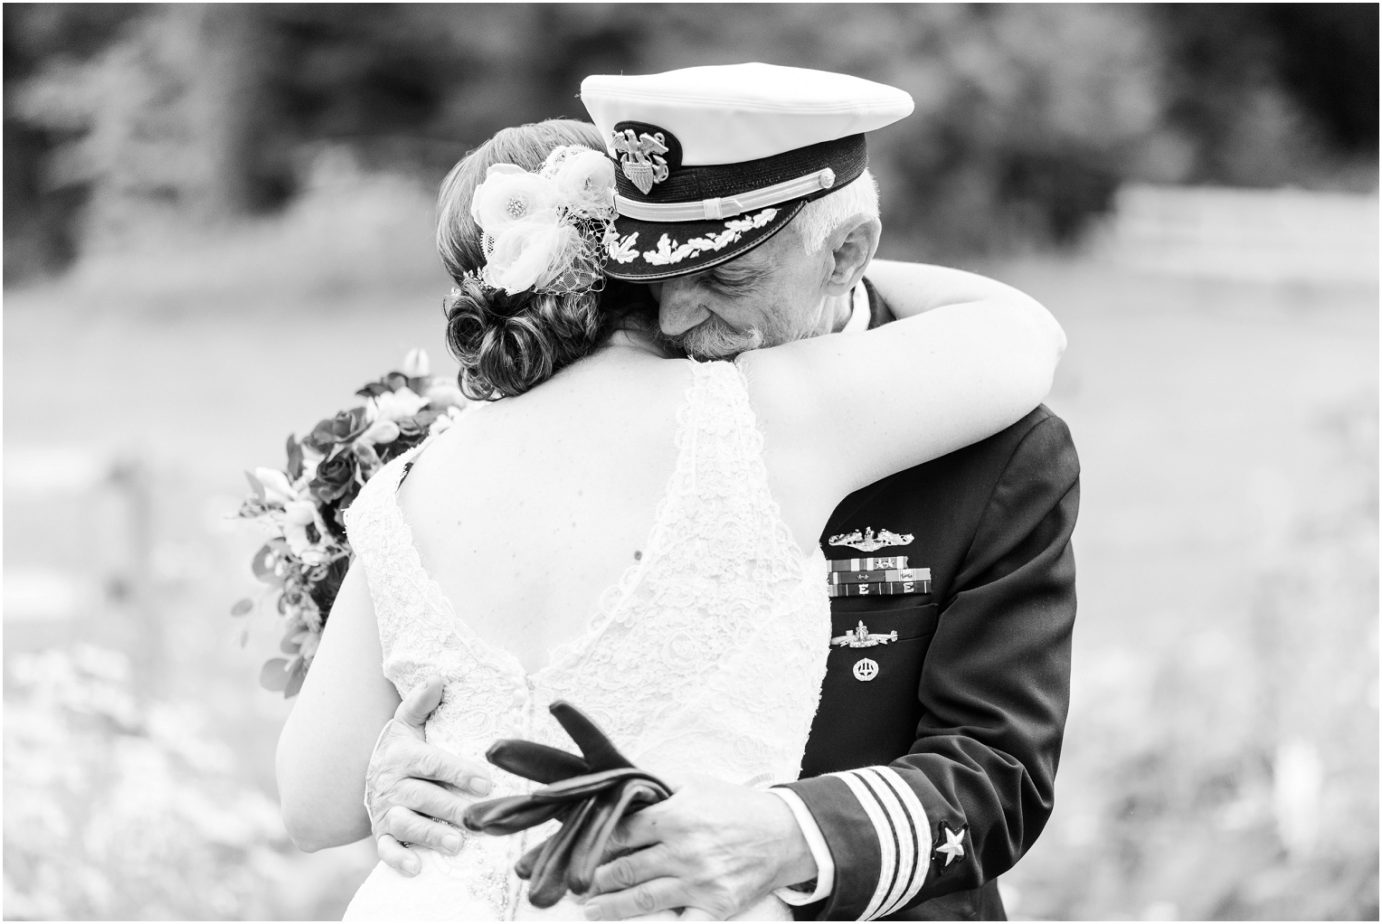 Pine River Ranch Wedding Bride and Father First Look Photo